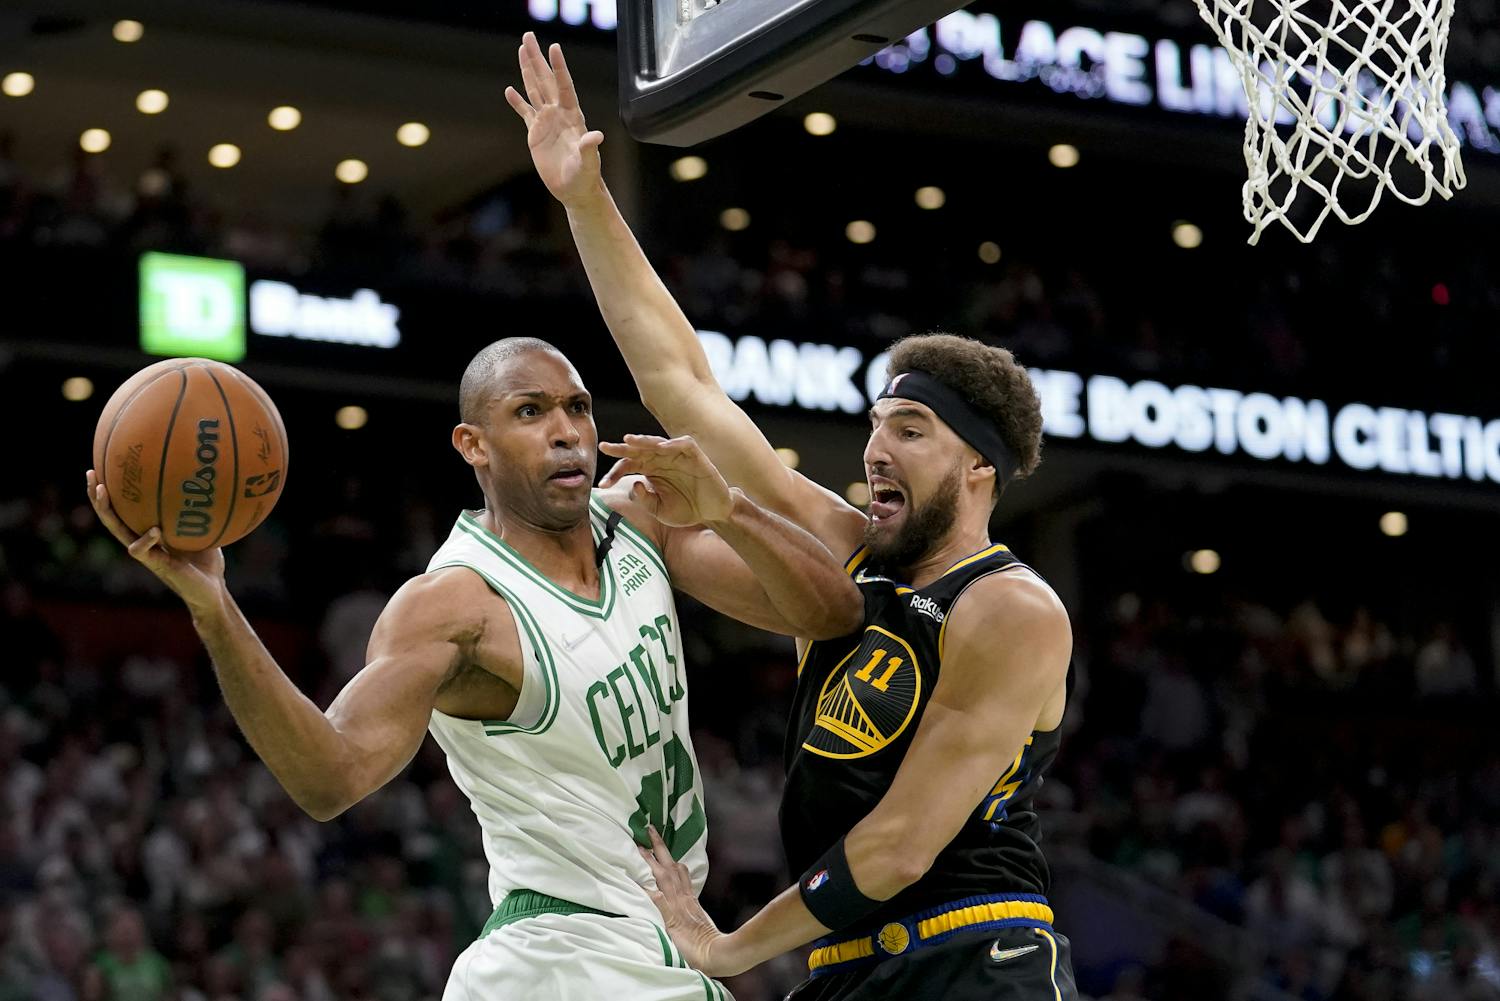 Boston Celtics center Al Horford looks to pass against Golden State Warriors guard Klay Thompson during the second quarter of Game 4 of the NBA Finals, June 10, 2022. (AP Photo/Steven Senne)